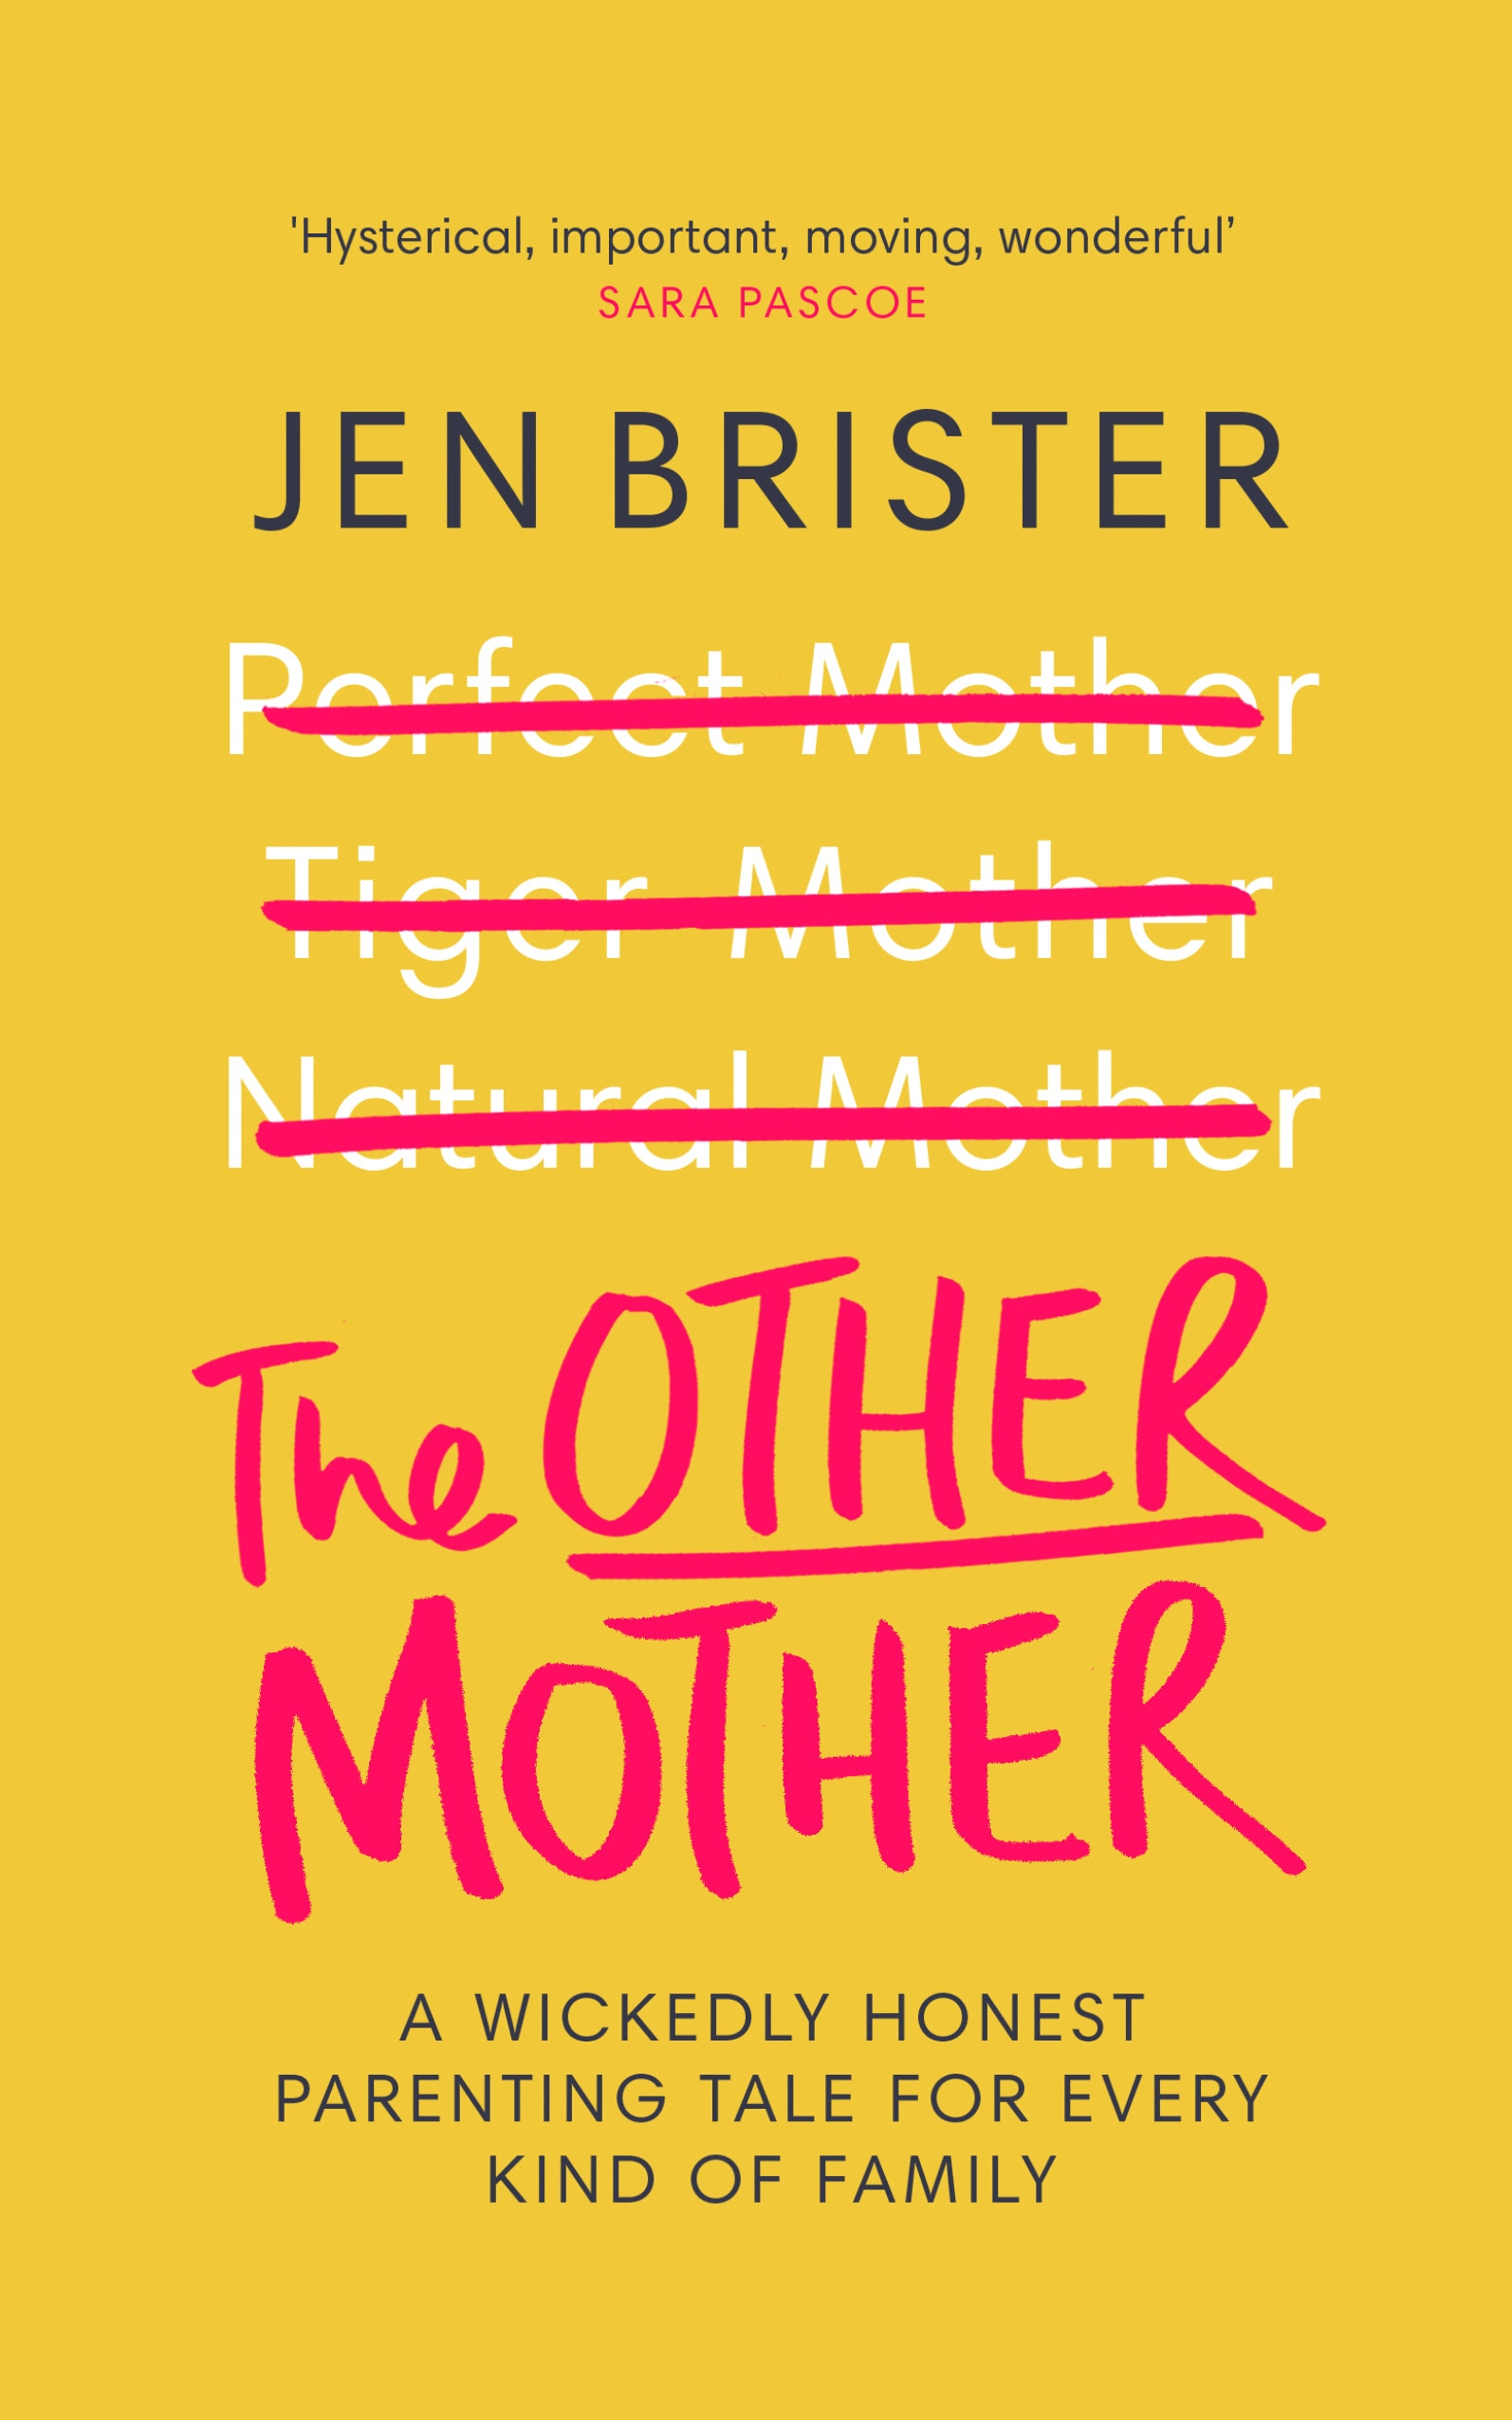 Book “The Other Mother” by Jen Brister — September 5, 2019